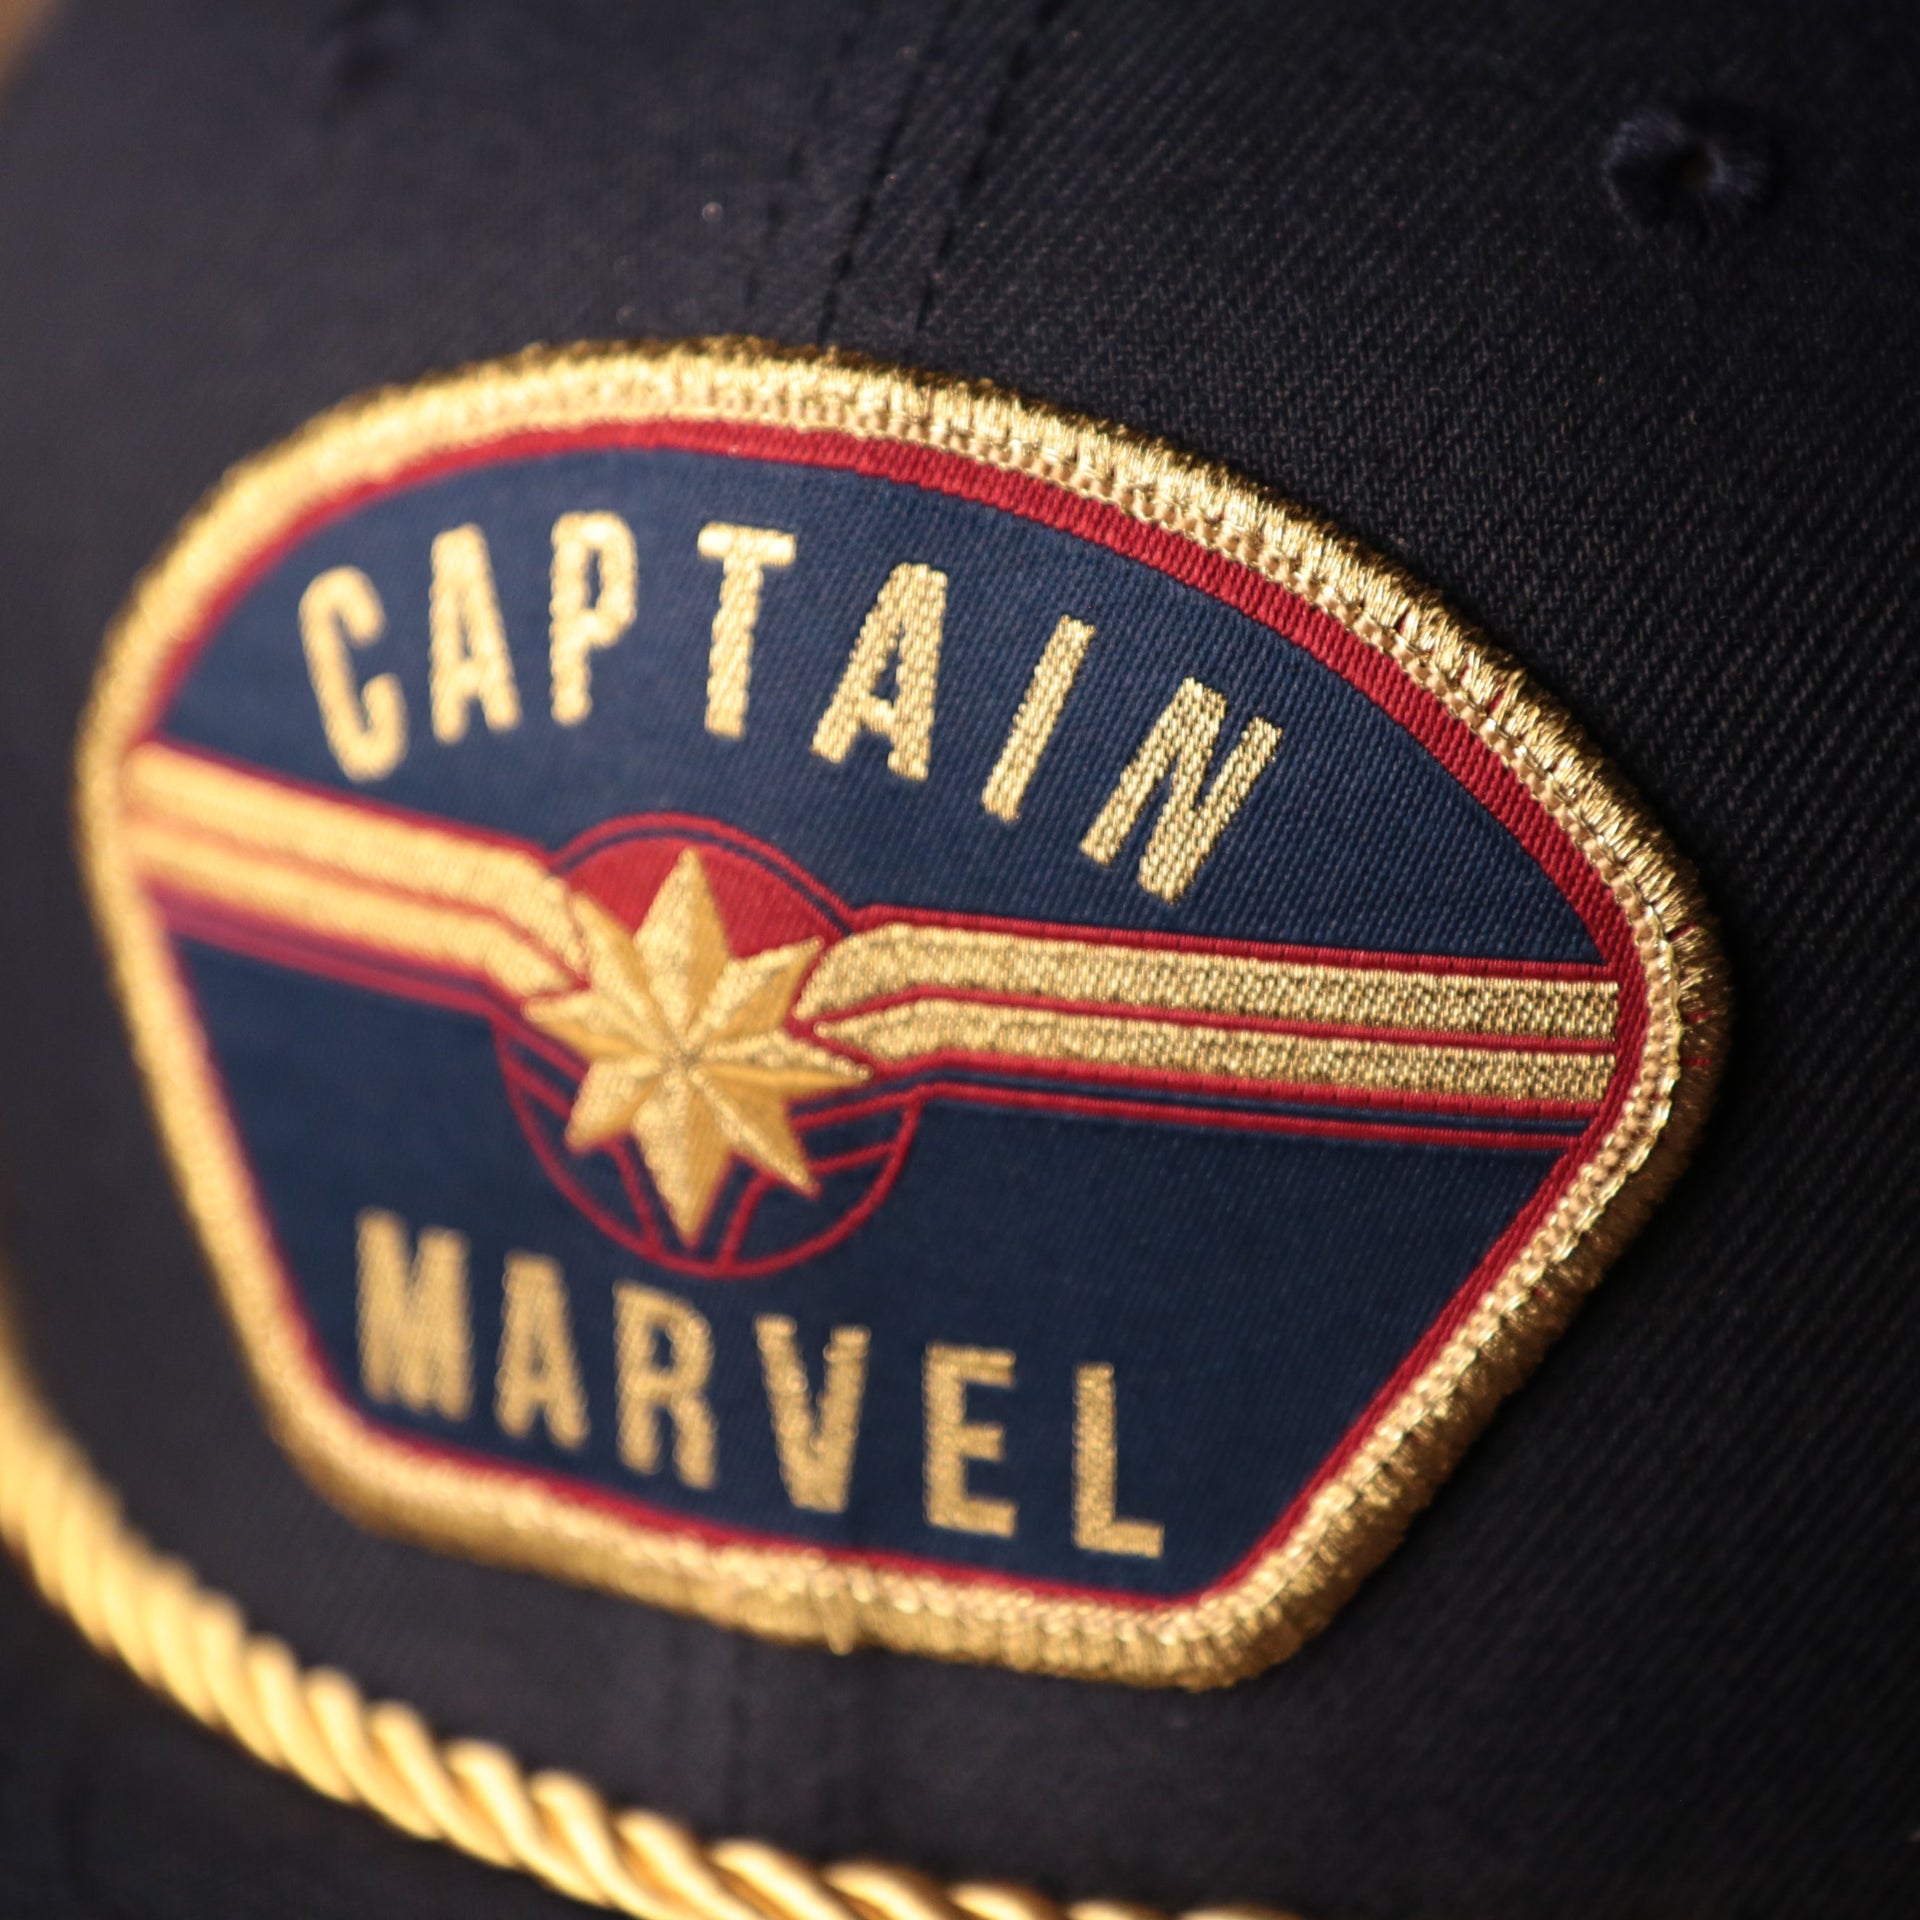 the captain marvel logo is gold, navy blue, and red Captain Marvel Red Bottom Snapback | Captain Marvel Navy Trucker Red Bottom Snap Cap